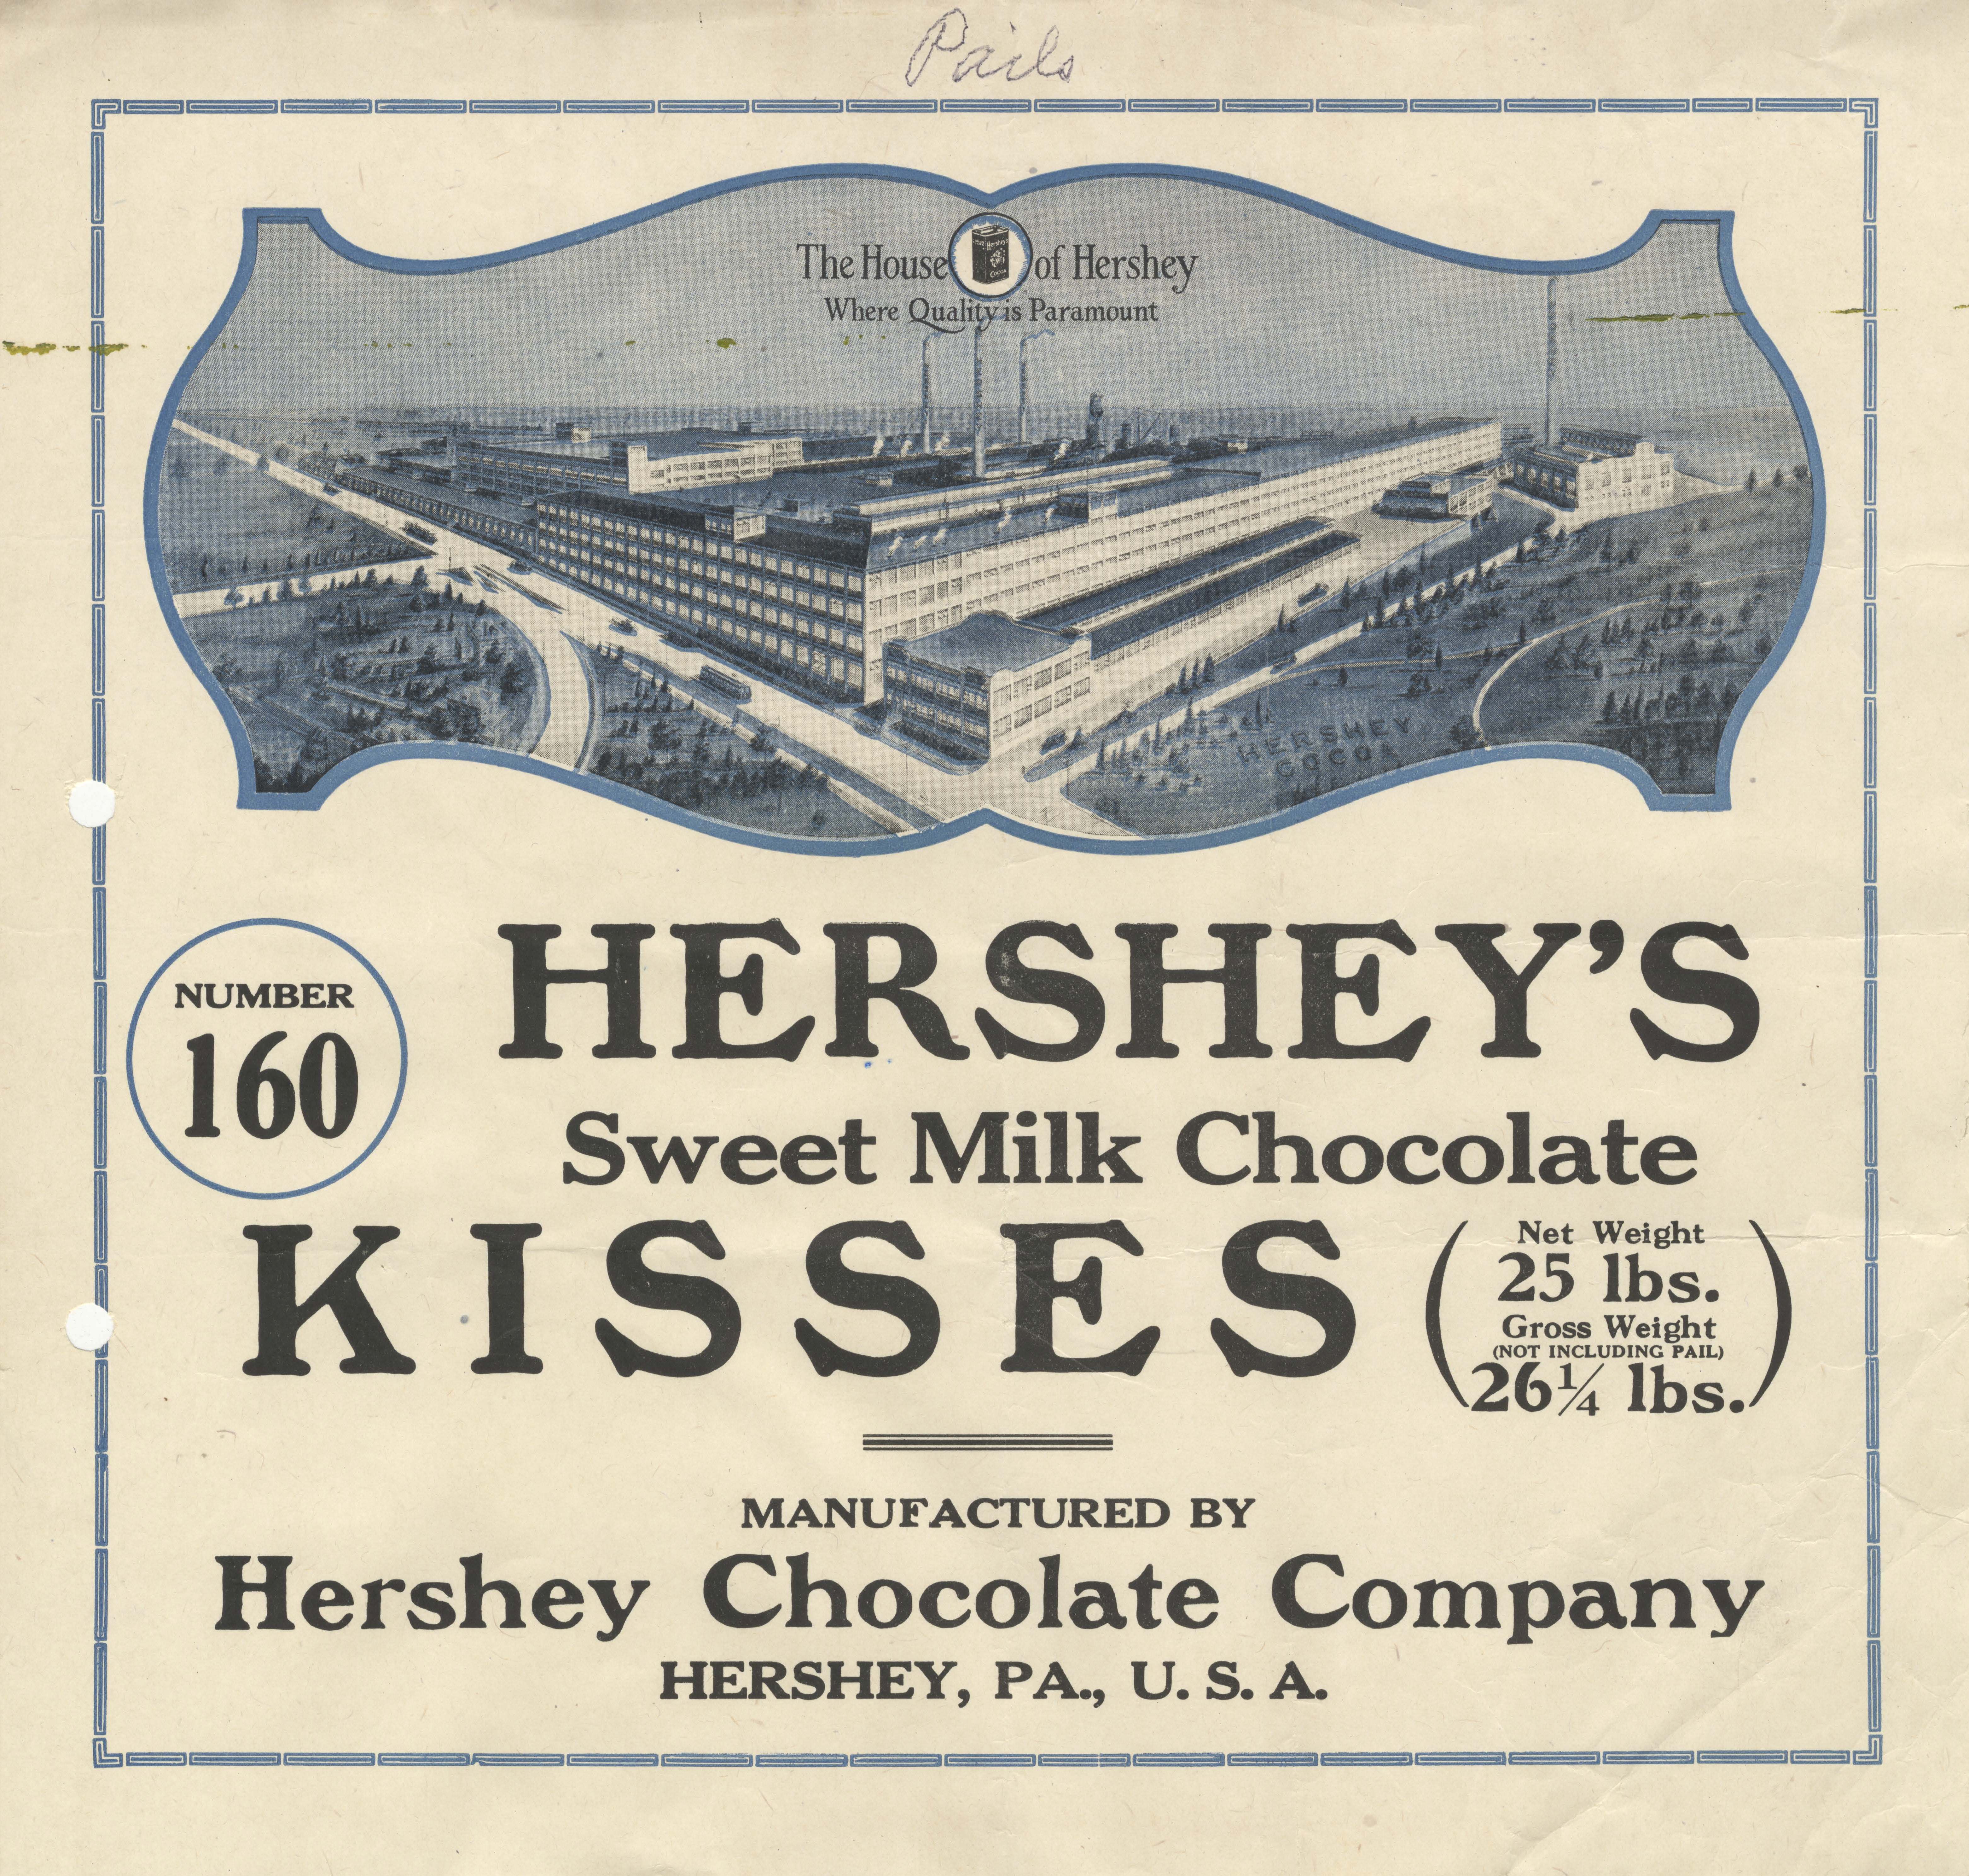 Label for Hershey's Sweet Milk Chocolate Kisses